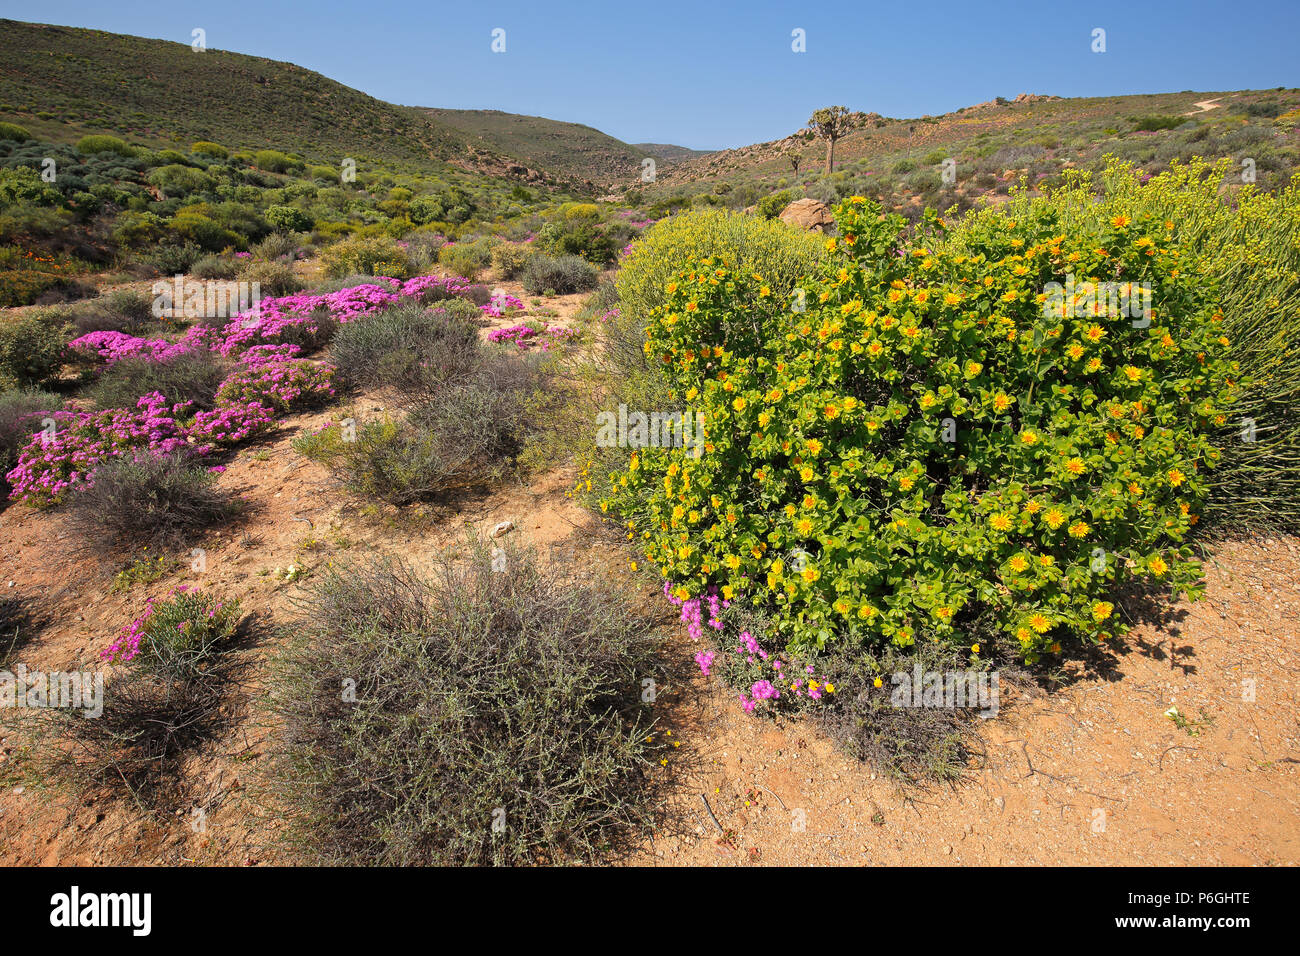 Landscape of brightly colored wild flowers, Namaqualand, Northern Cape, South Africa Stock Photo